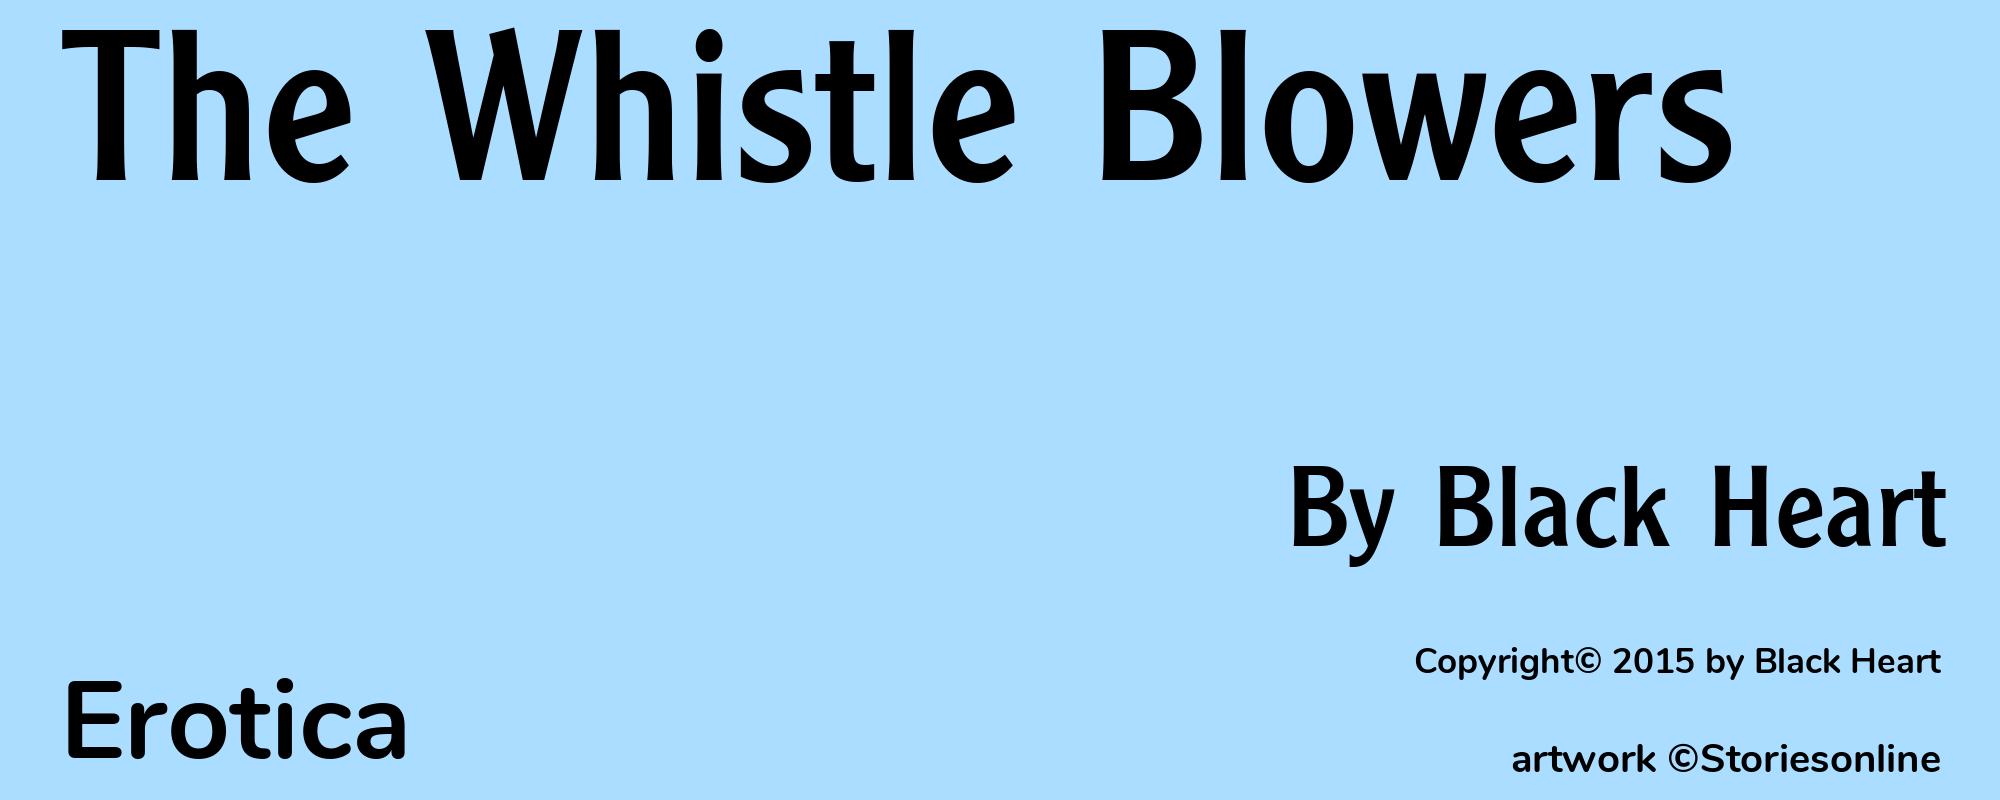 The Whistle Blowers - Cover